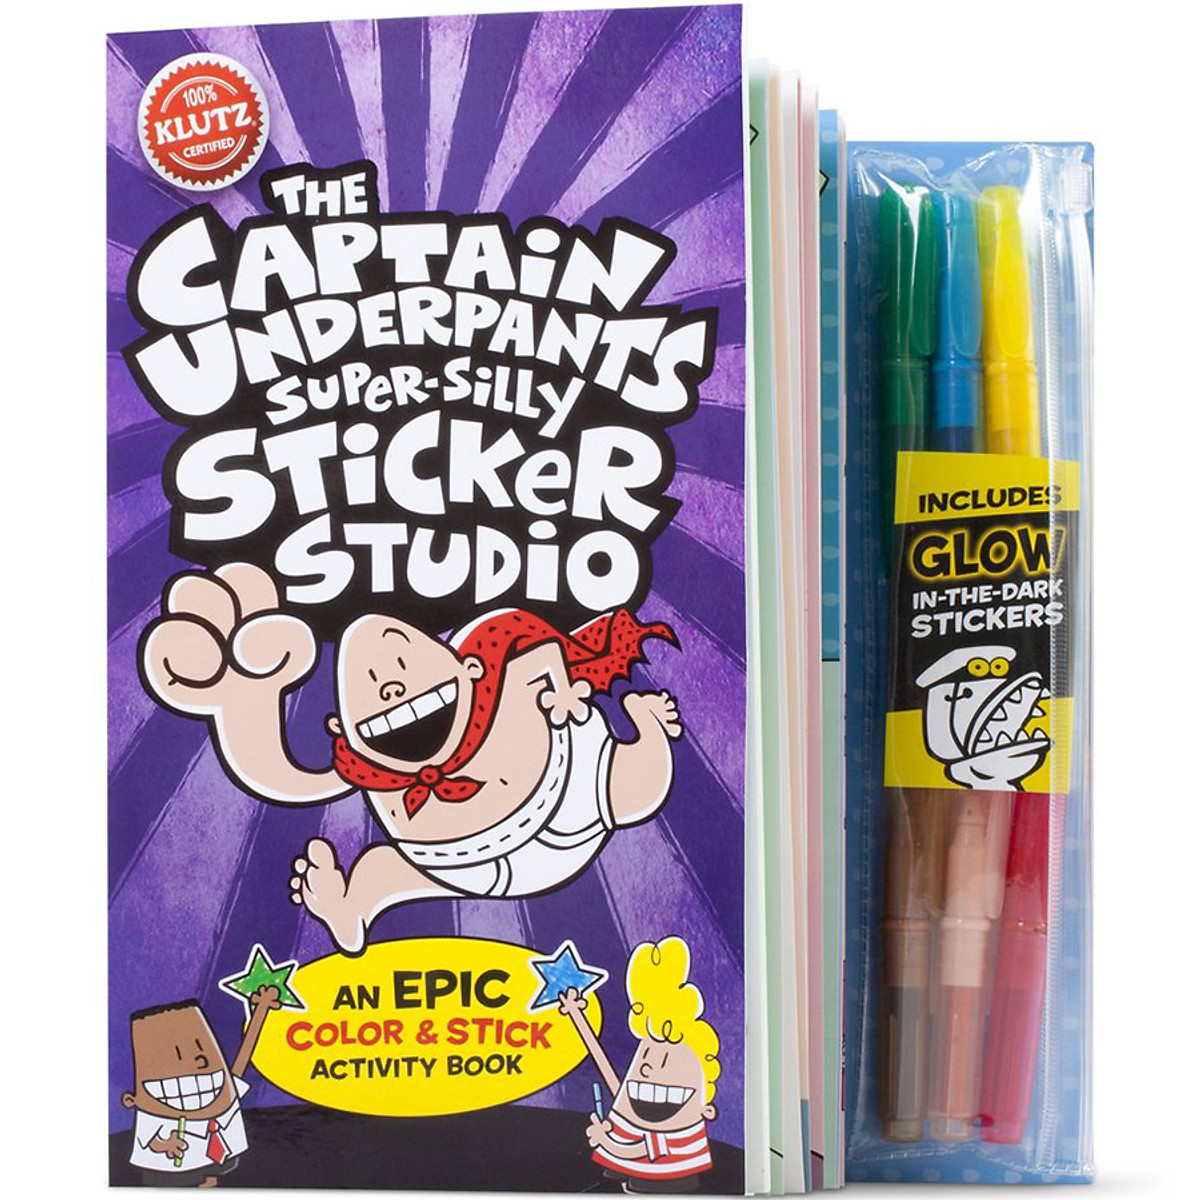 Klutz: The Captain Underpants Super-Silly Sticker Studio Pack (An Epic Color & Stick Activity Book)